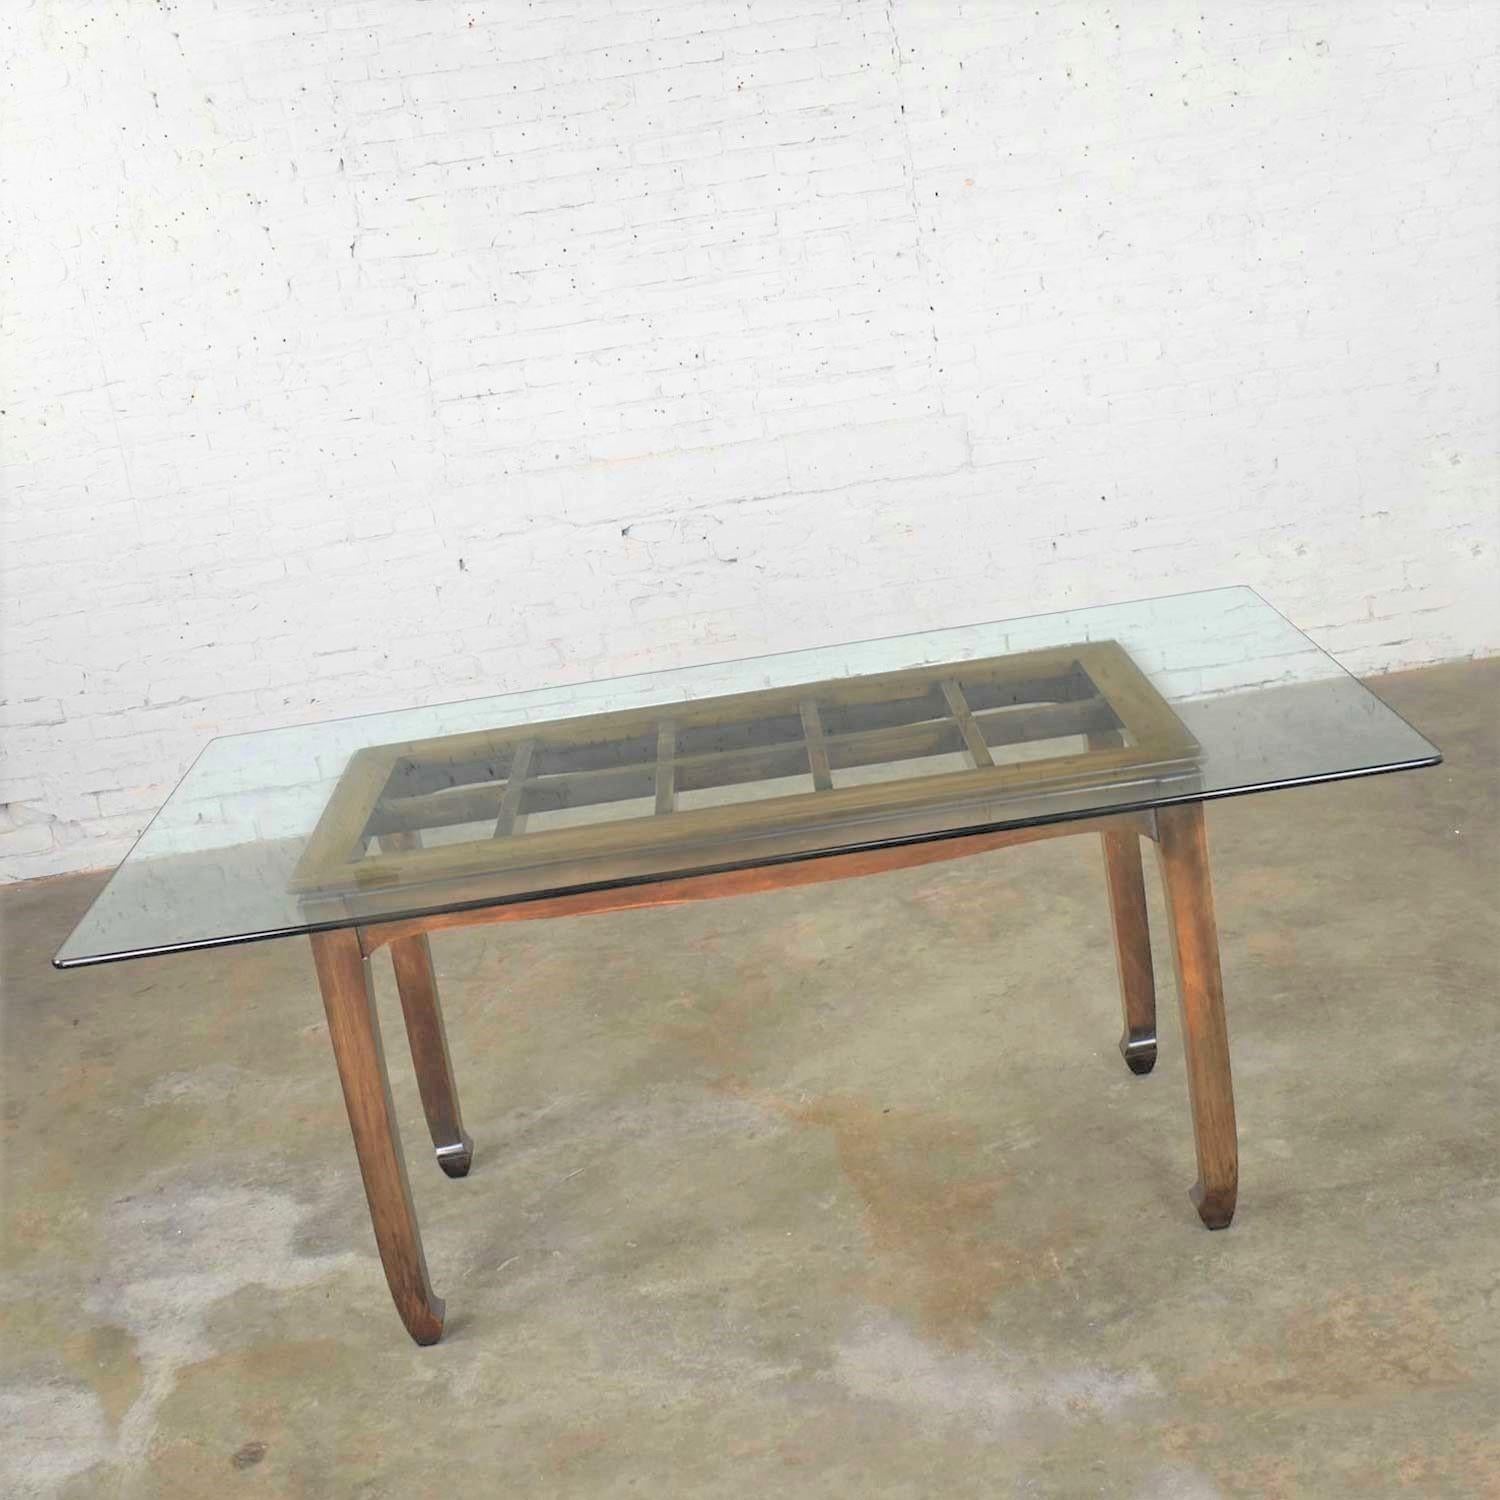 Handsome chinoiserie chow leg walnut color finish dining table with glass top. It is in wonderful vintage condition. We have done some finish restoration, but it still has a lovely patina. There has been a repair made on one of the end skirts. The